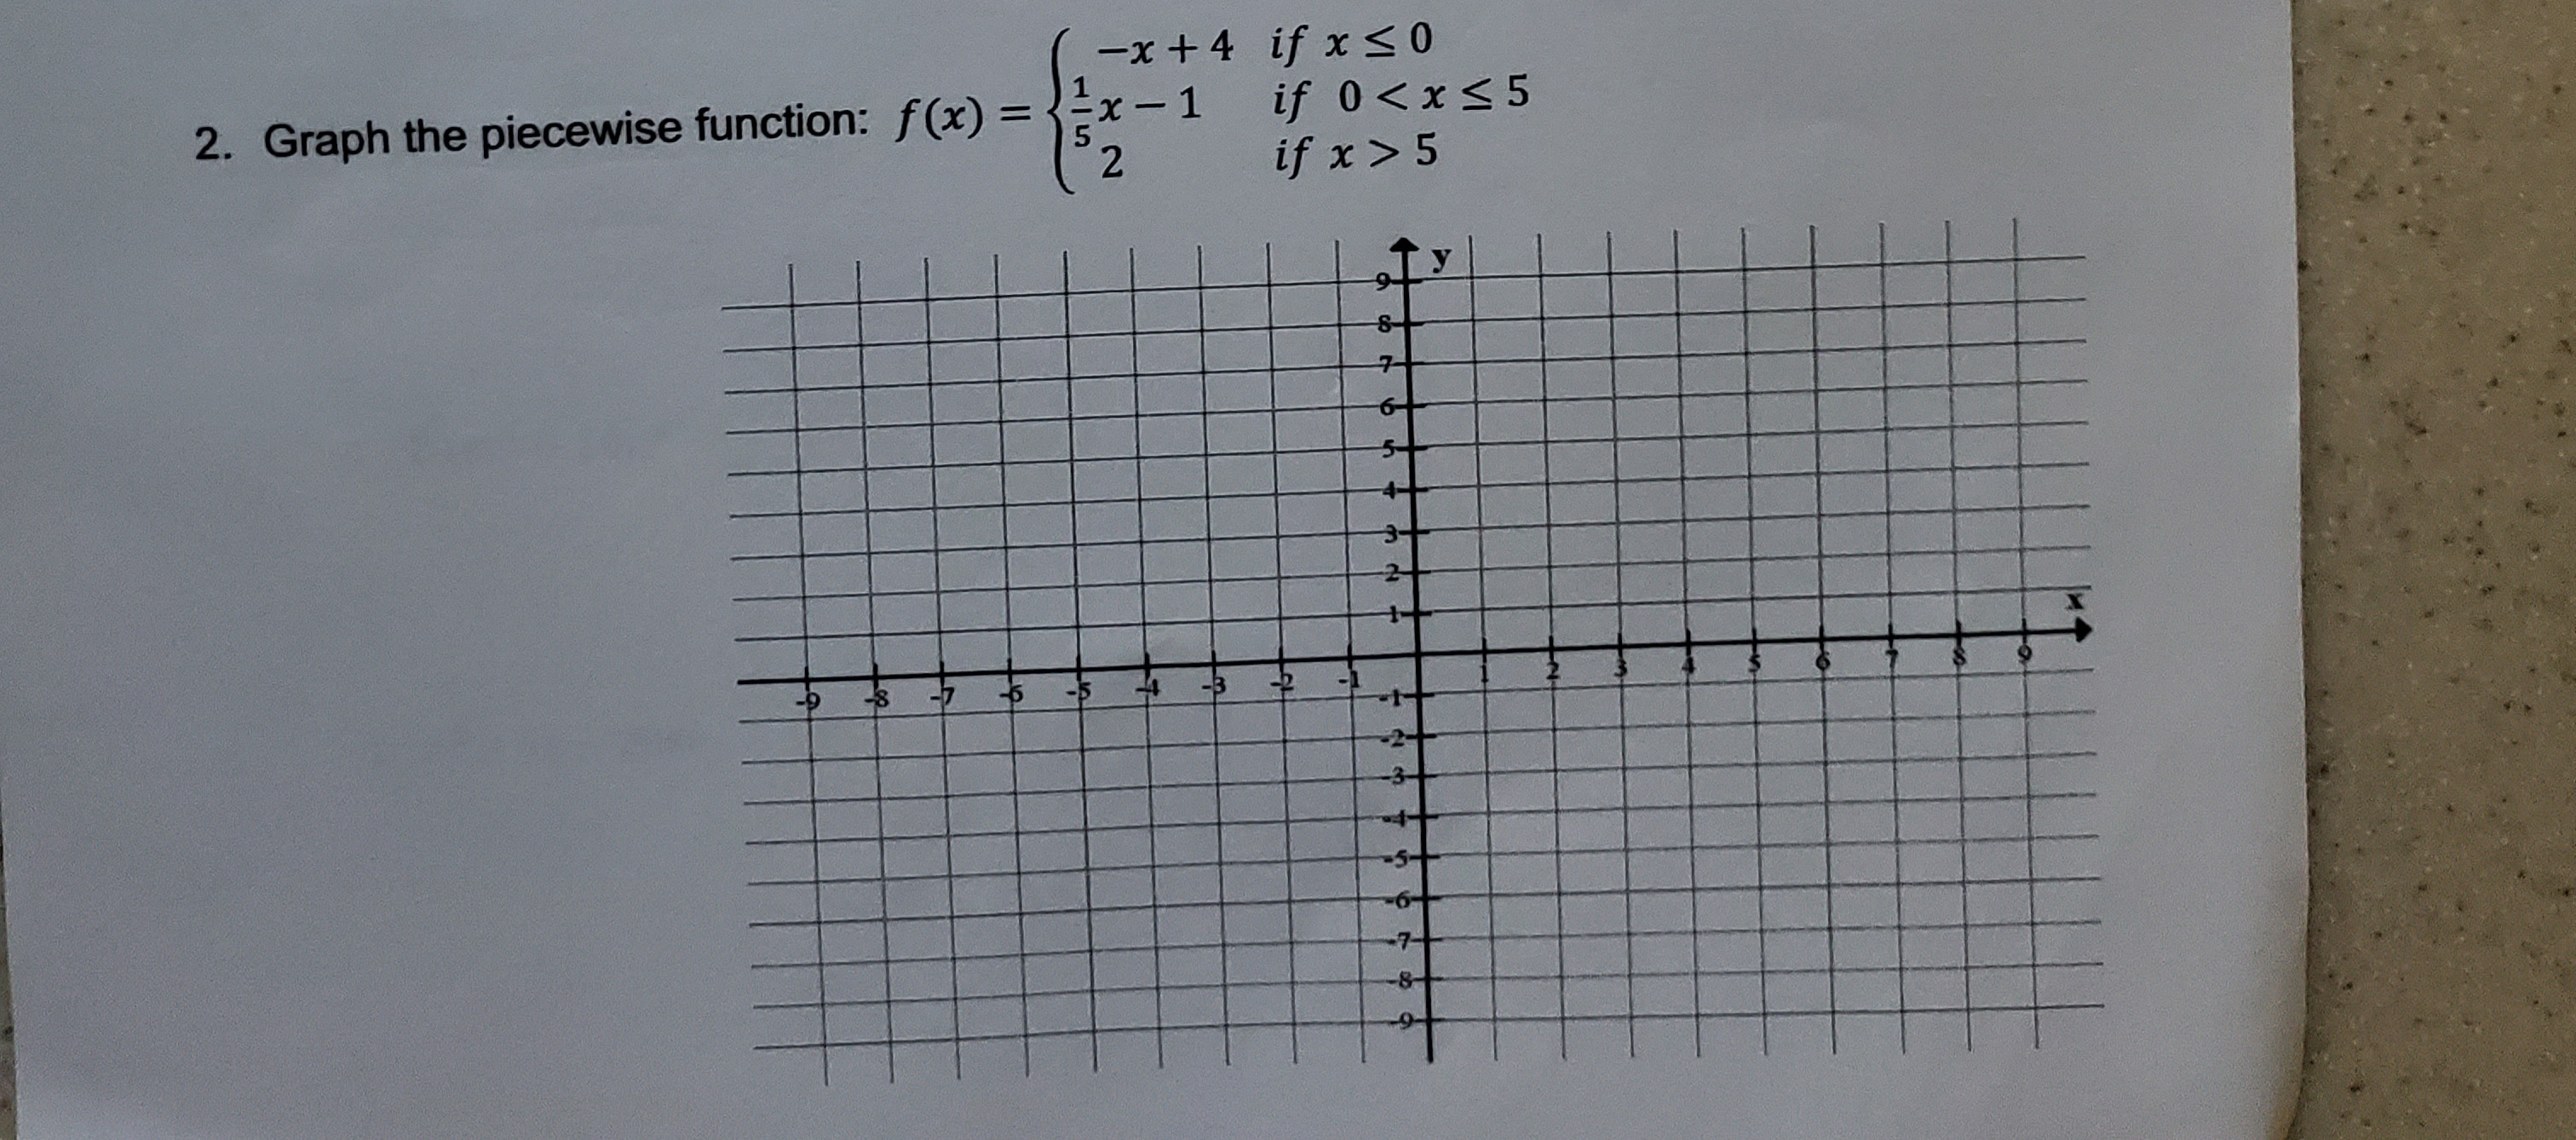 -x + 4 if x<0
if 0<x<5
if x > 5
2. Graph the piecewise function: f(x) = {x - 1
|
y
7-
-3-
-5-
-7-+
-8-
